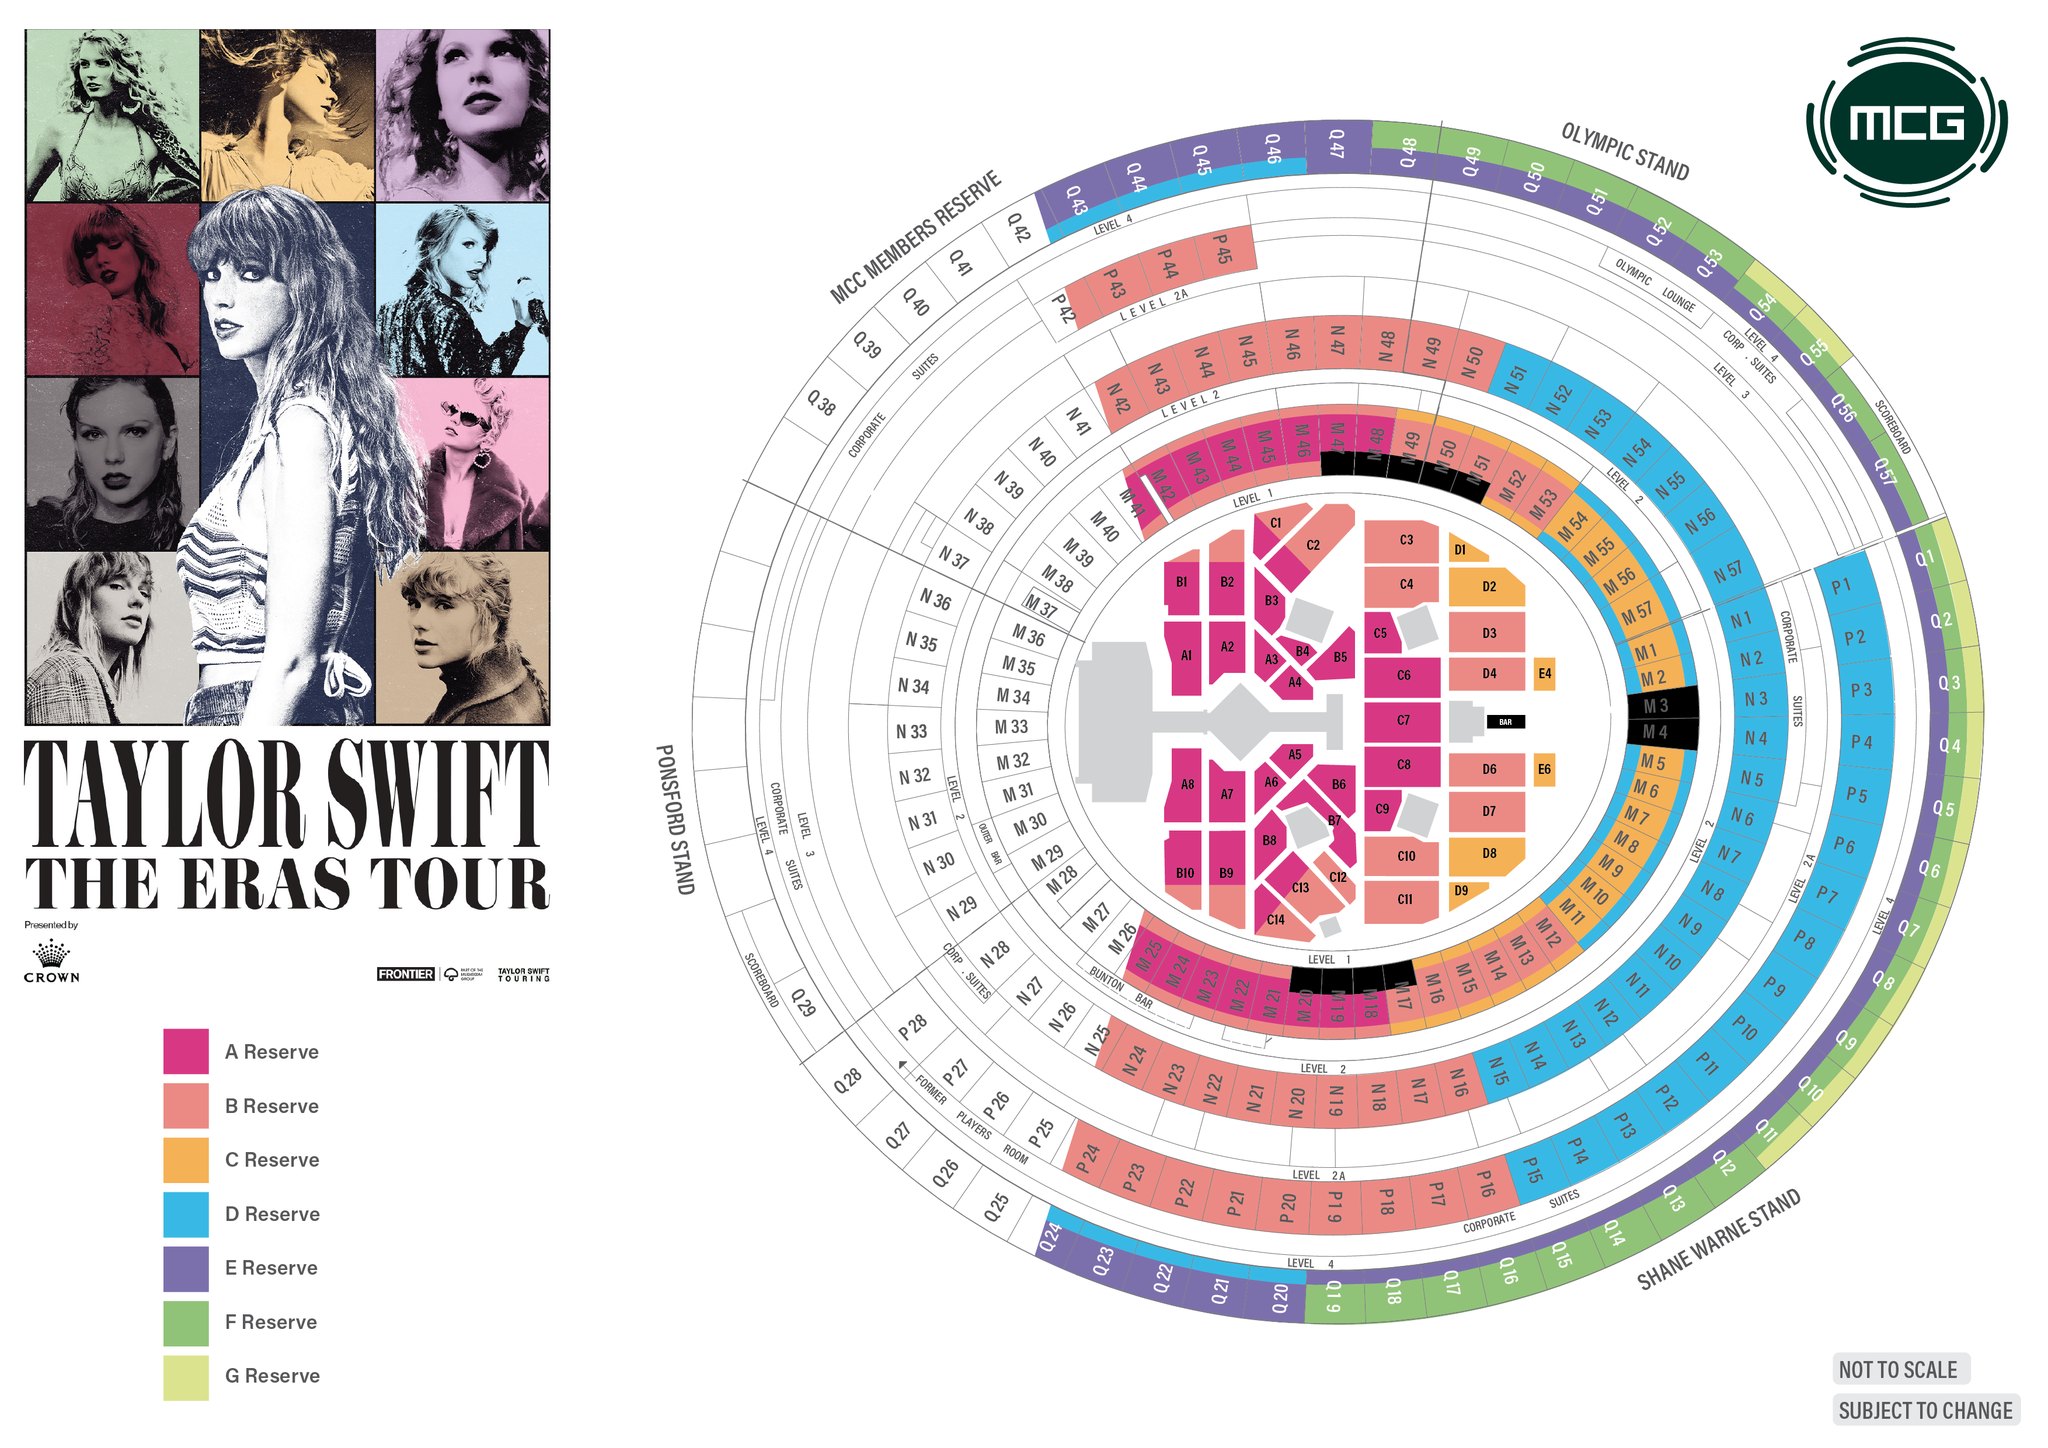 Melbourne seating map for Taylor Swift's Eras tour